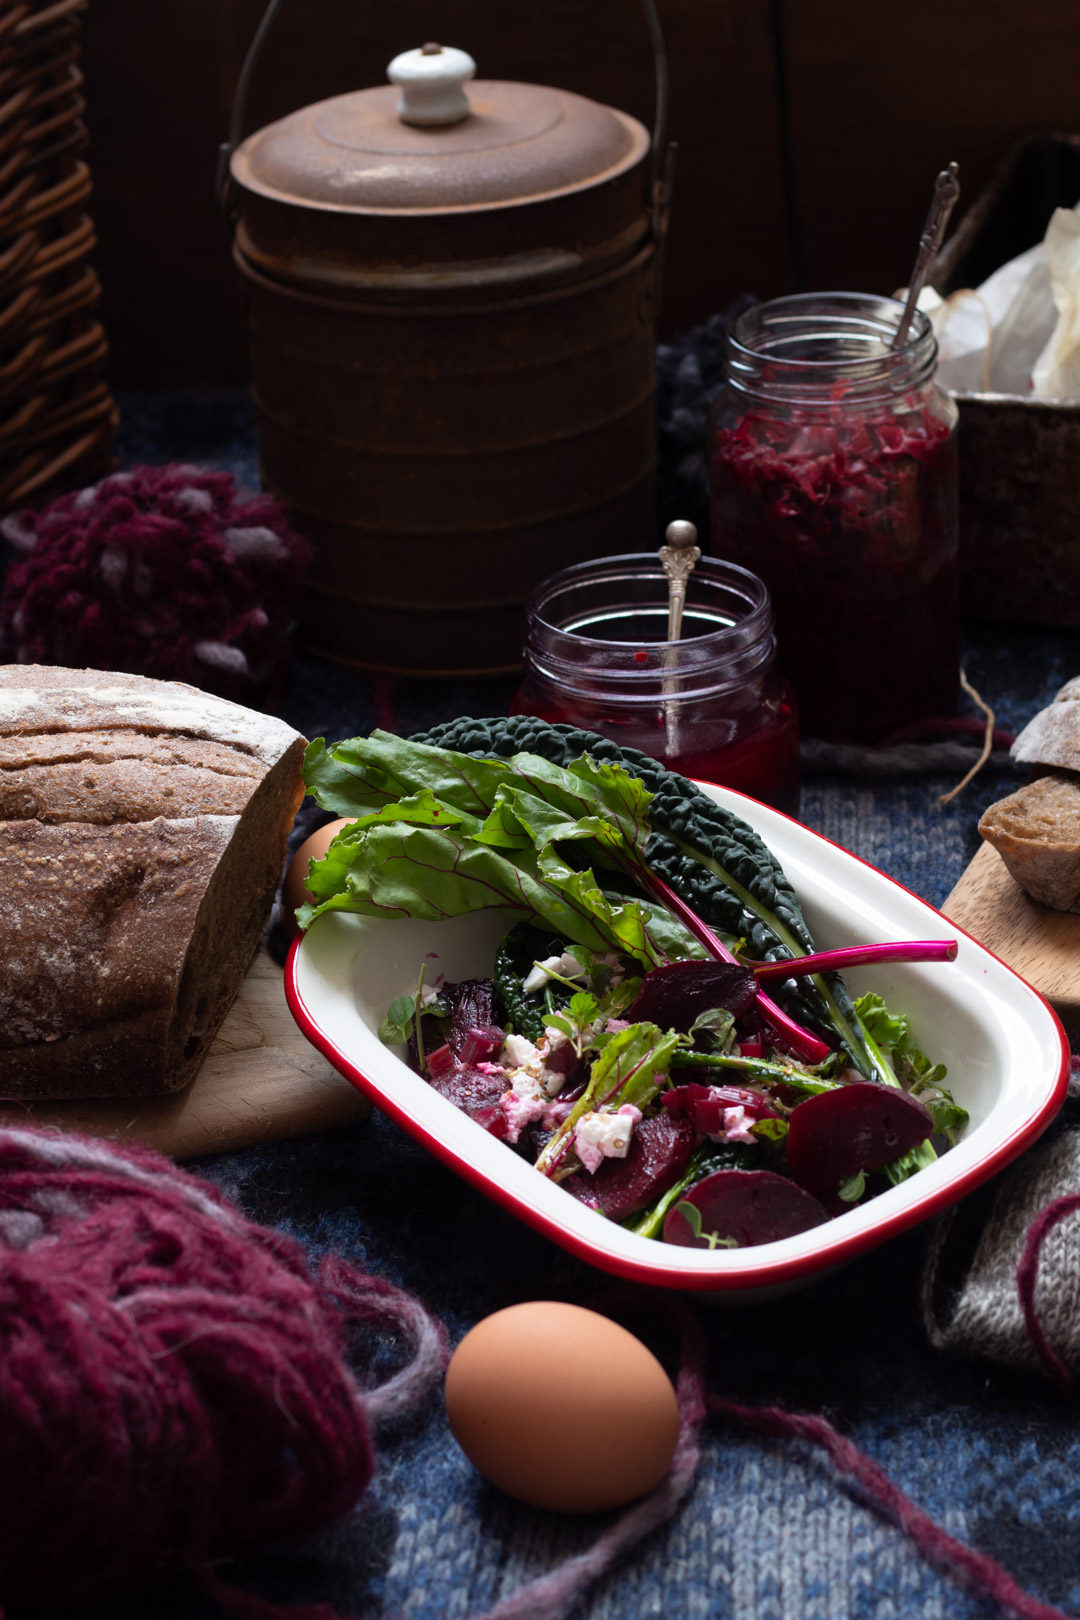 beetroot salad picnic: roasted beetroot, beetroot stem quick pickle, beetroot leaves - use up all of your beetroot